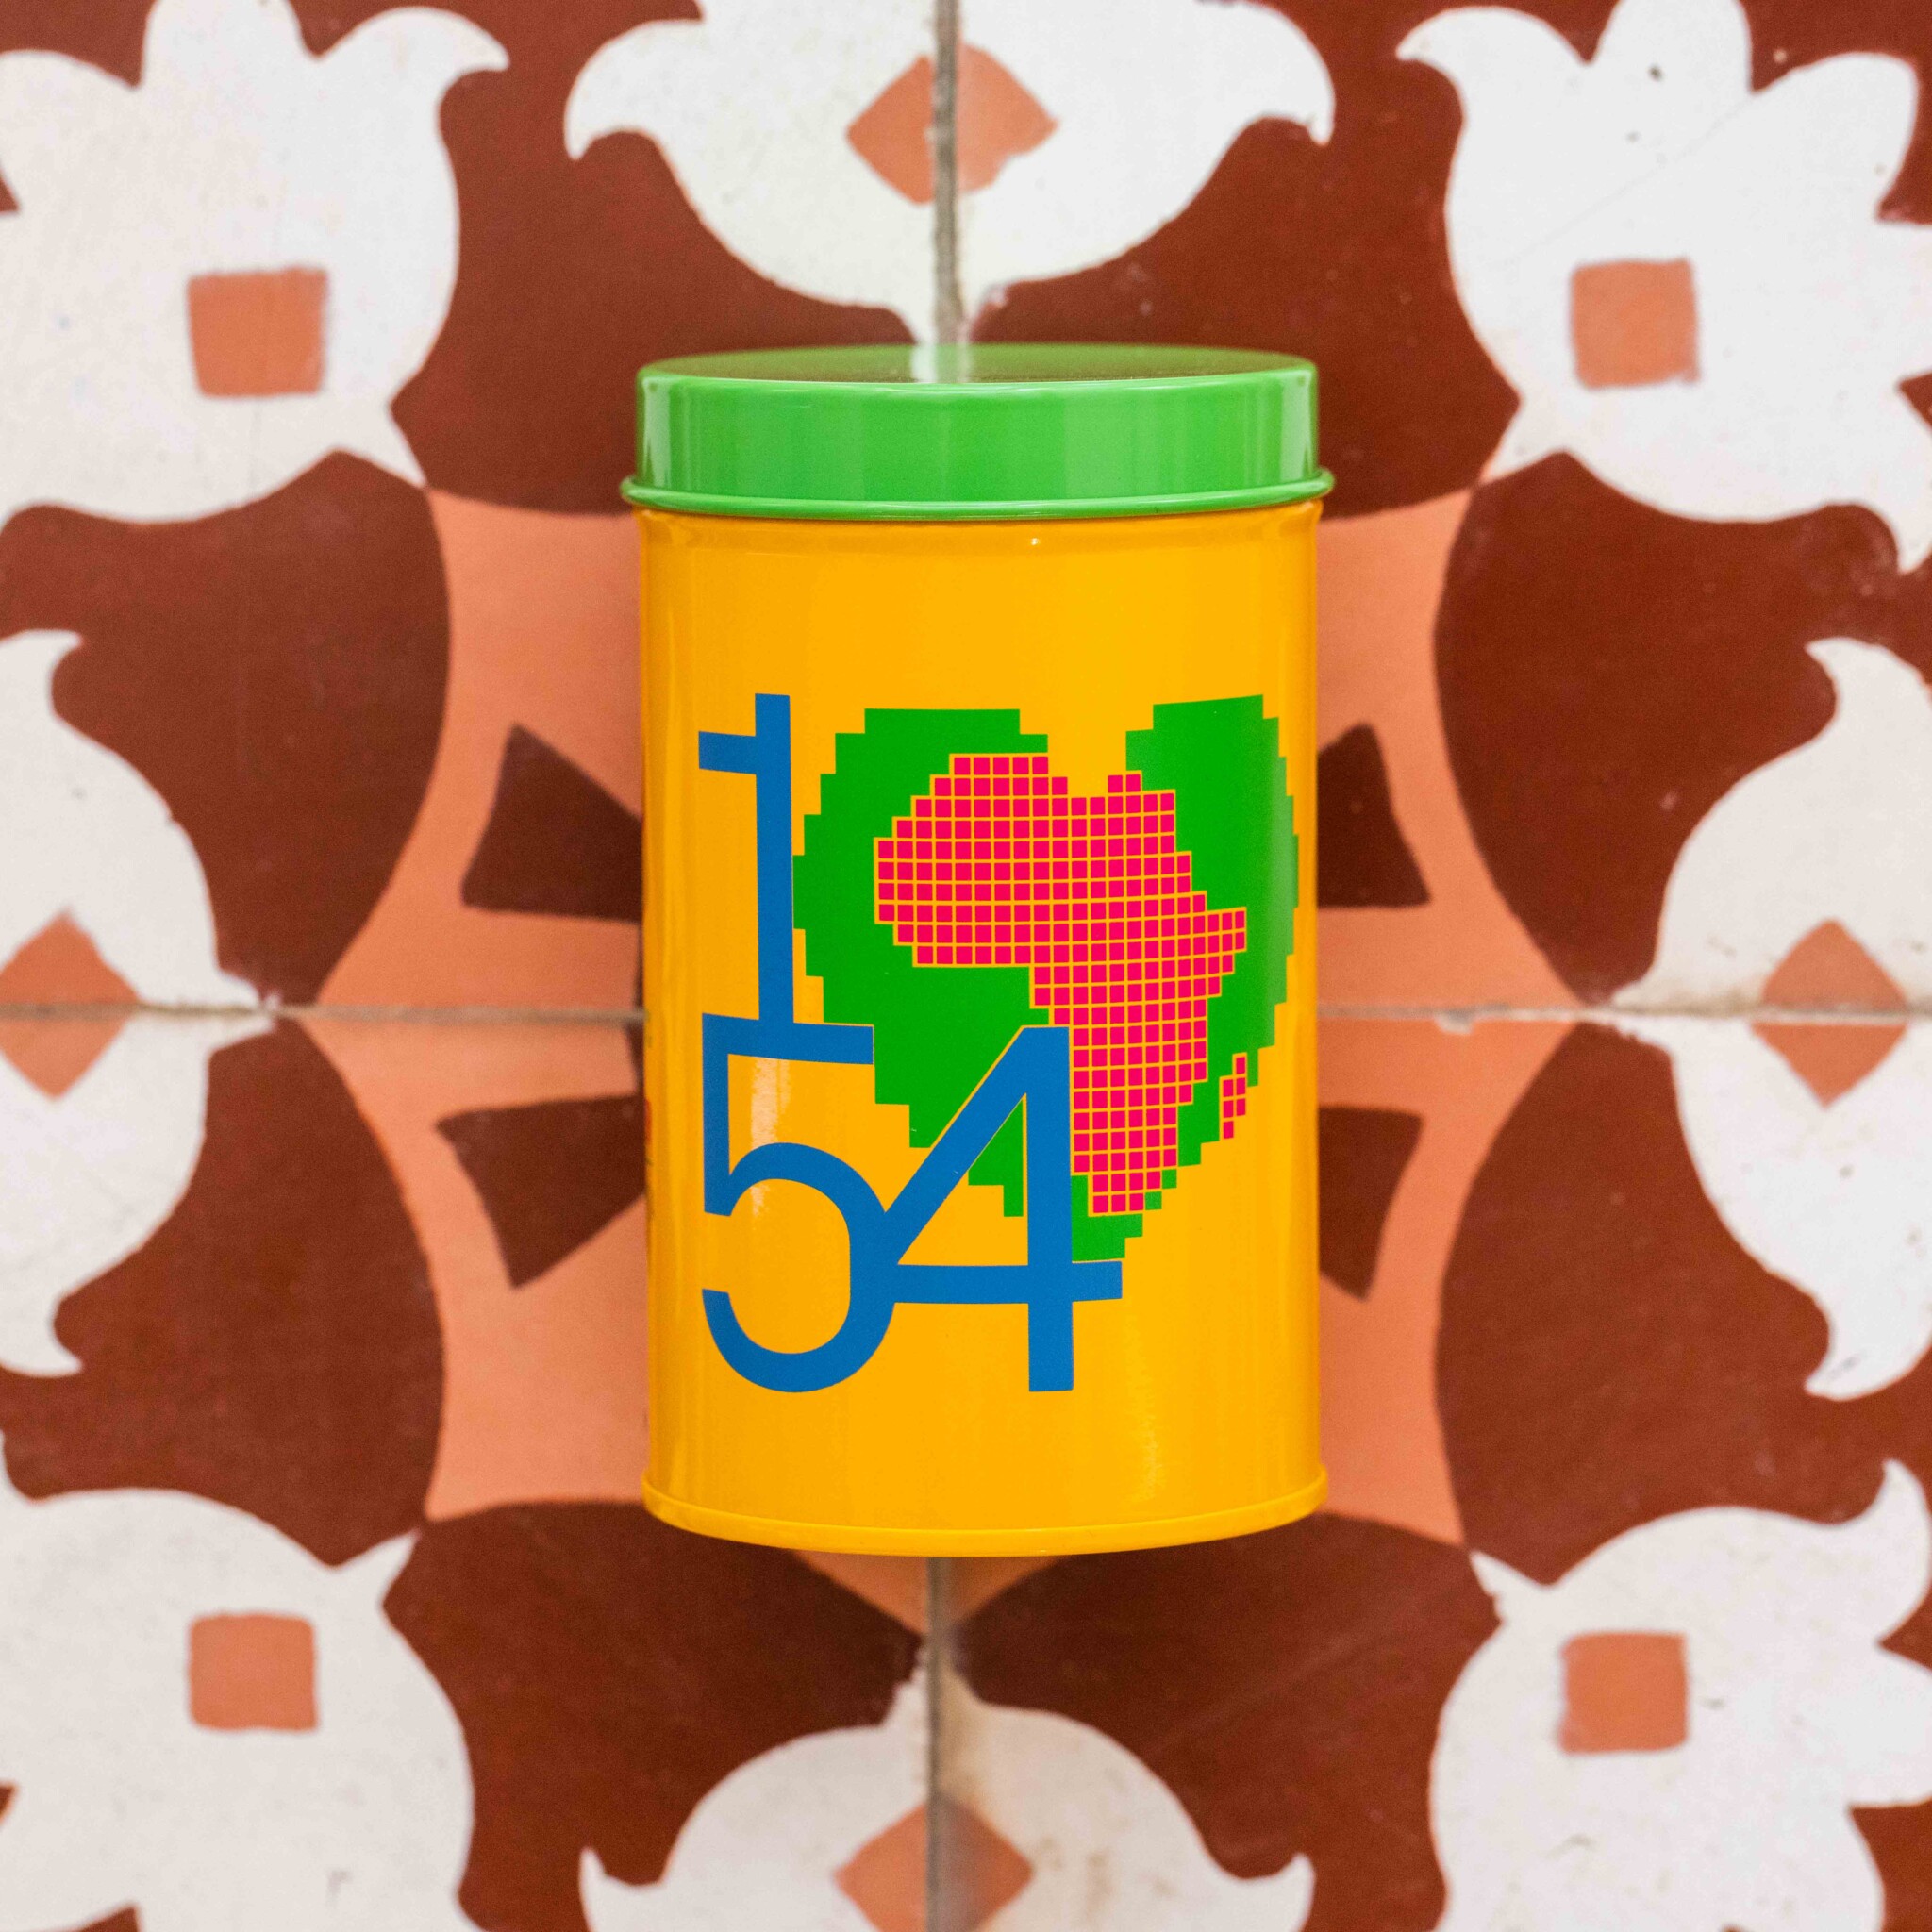 1-54 Special Projects 2022: 'Love Letter', specially blended tea in collectible metal tea can designed by artist Hassan Hajjaj. Photography by Adnane Zemmama.